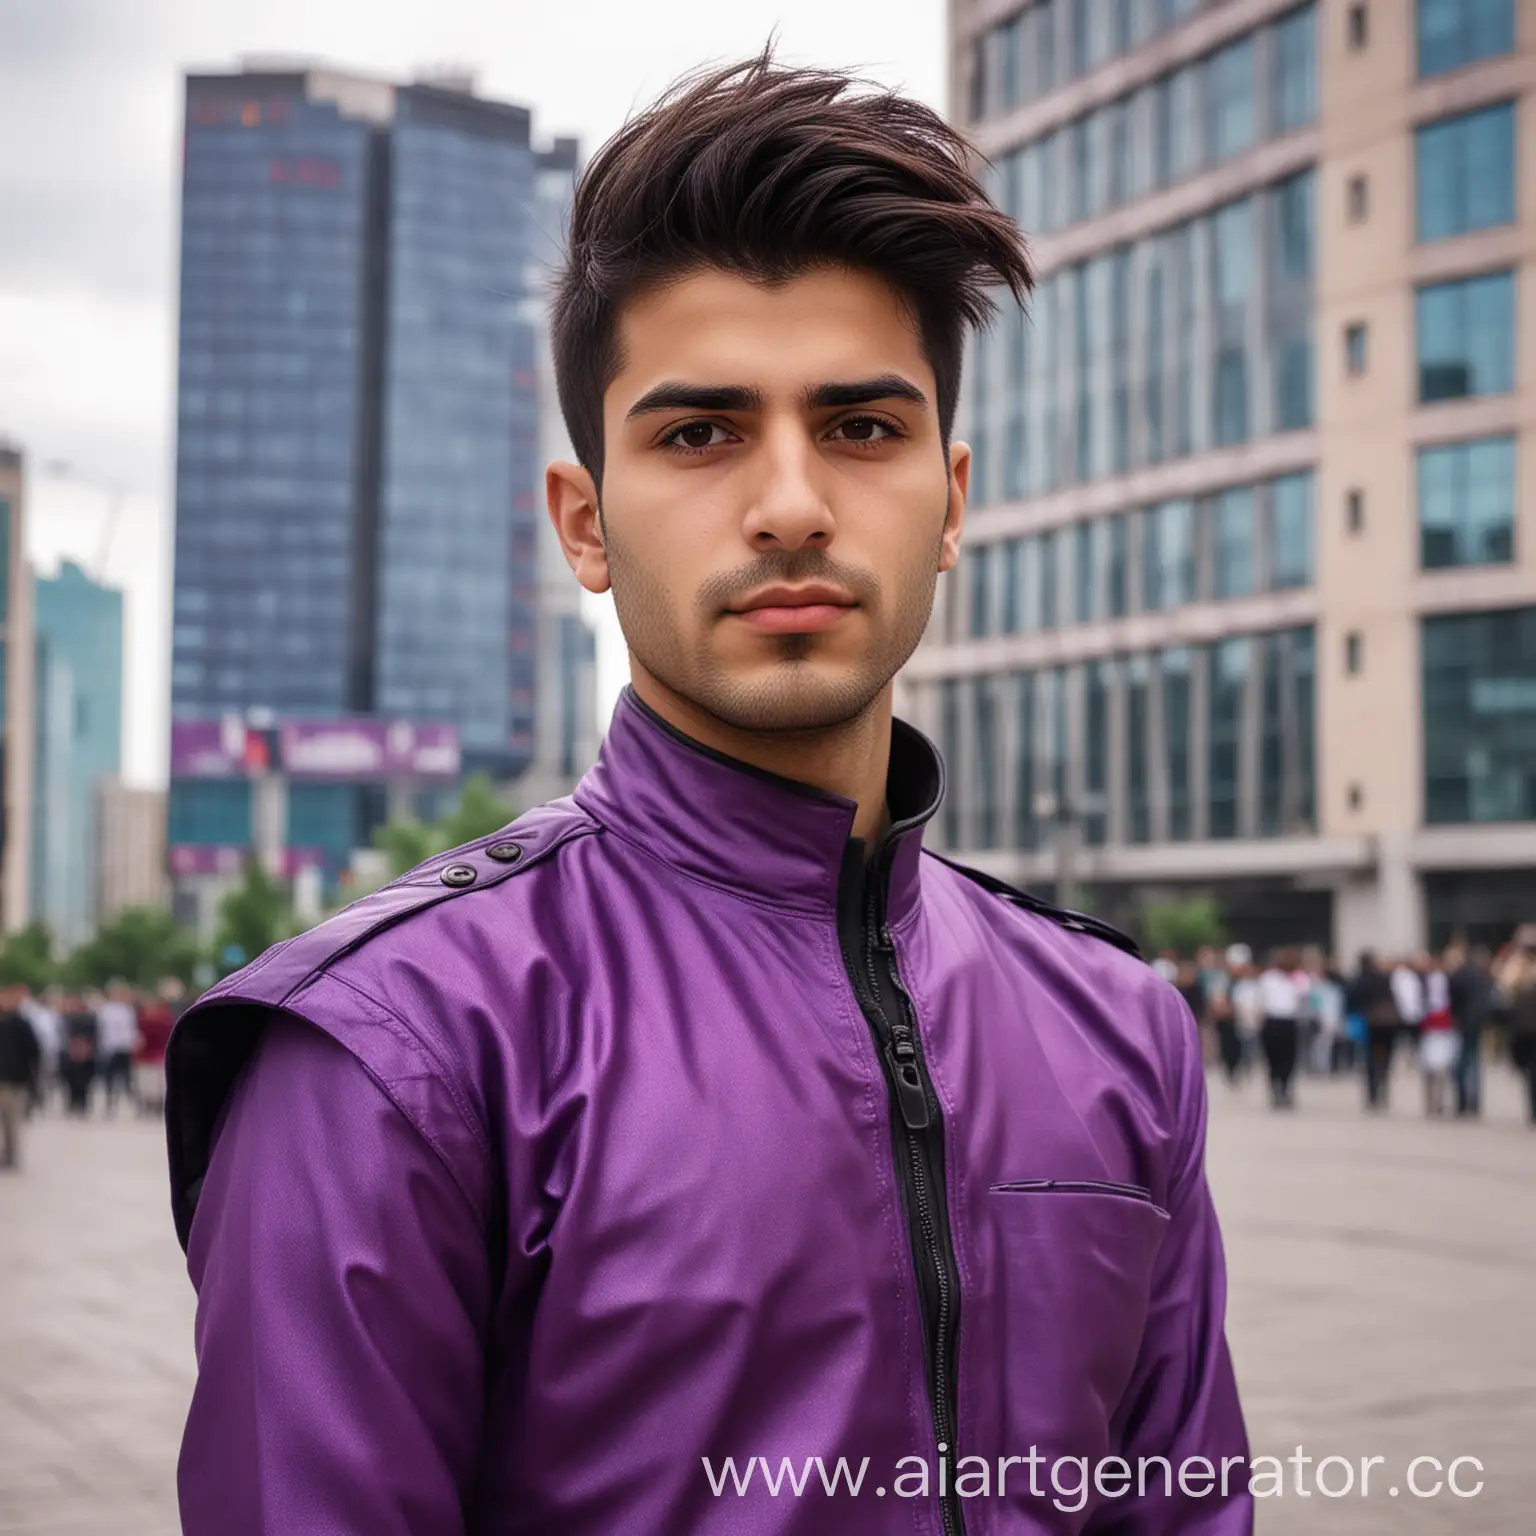 A young Kurd without a beard with a high hairstyle in purple futuristic clothes on the background of a modern city square